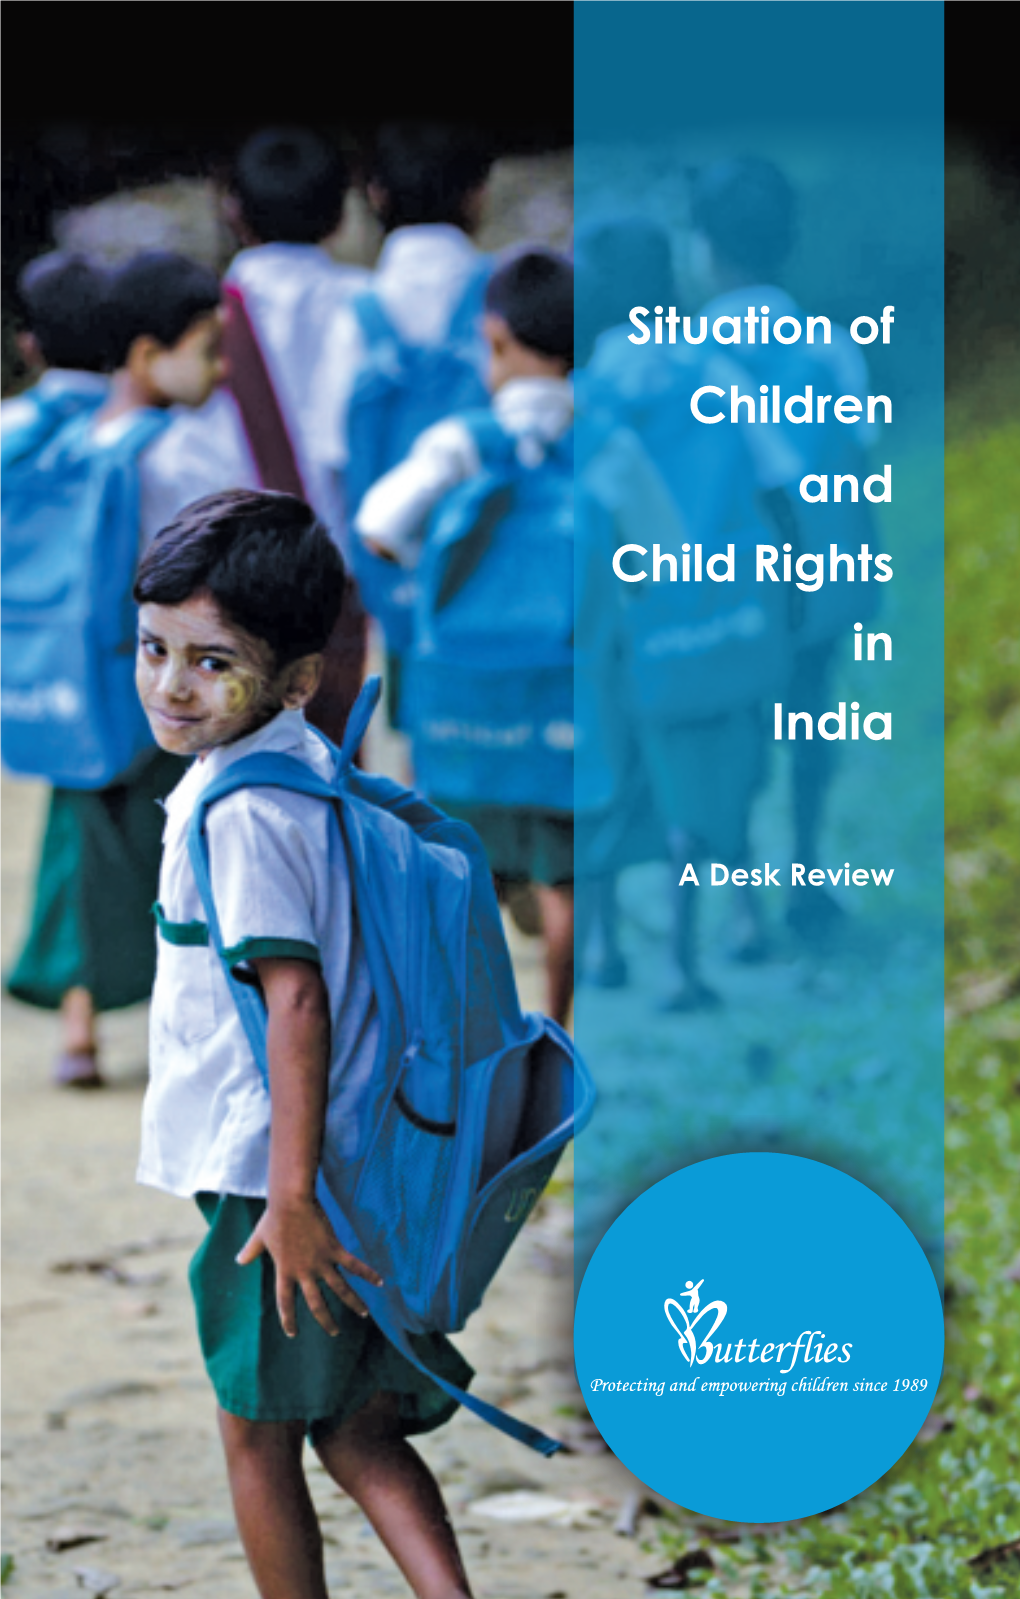 Situation of Children and Child Rights in India